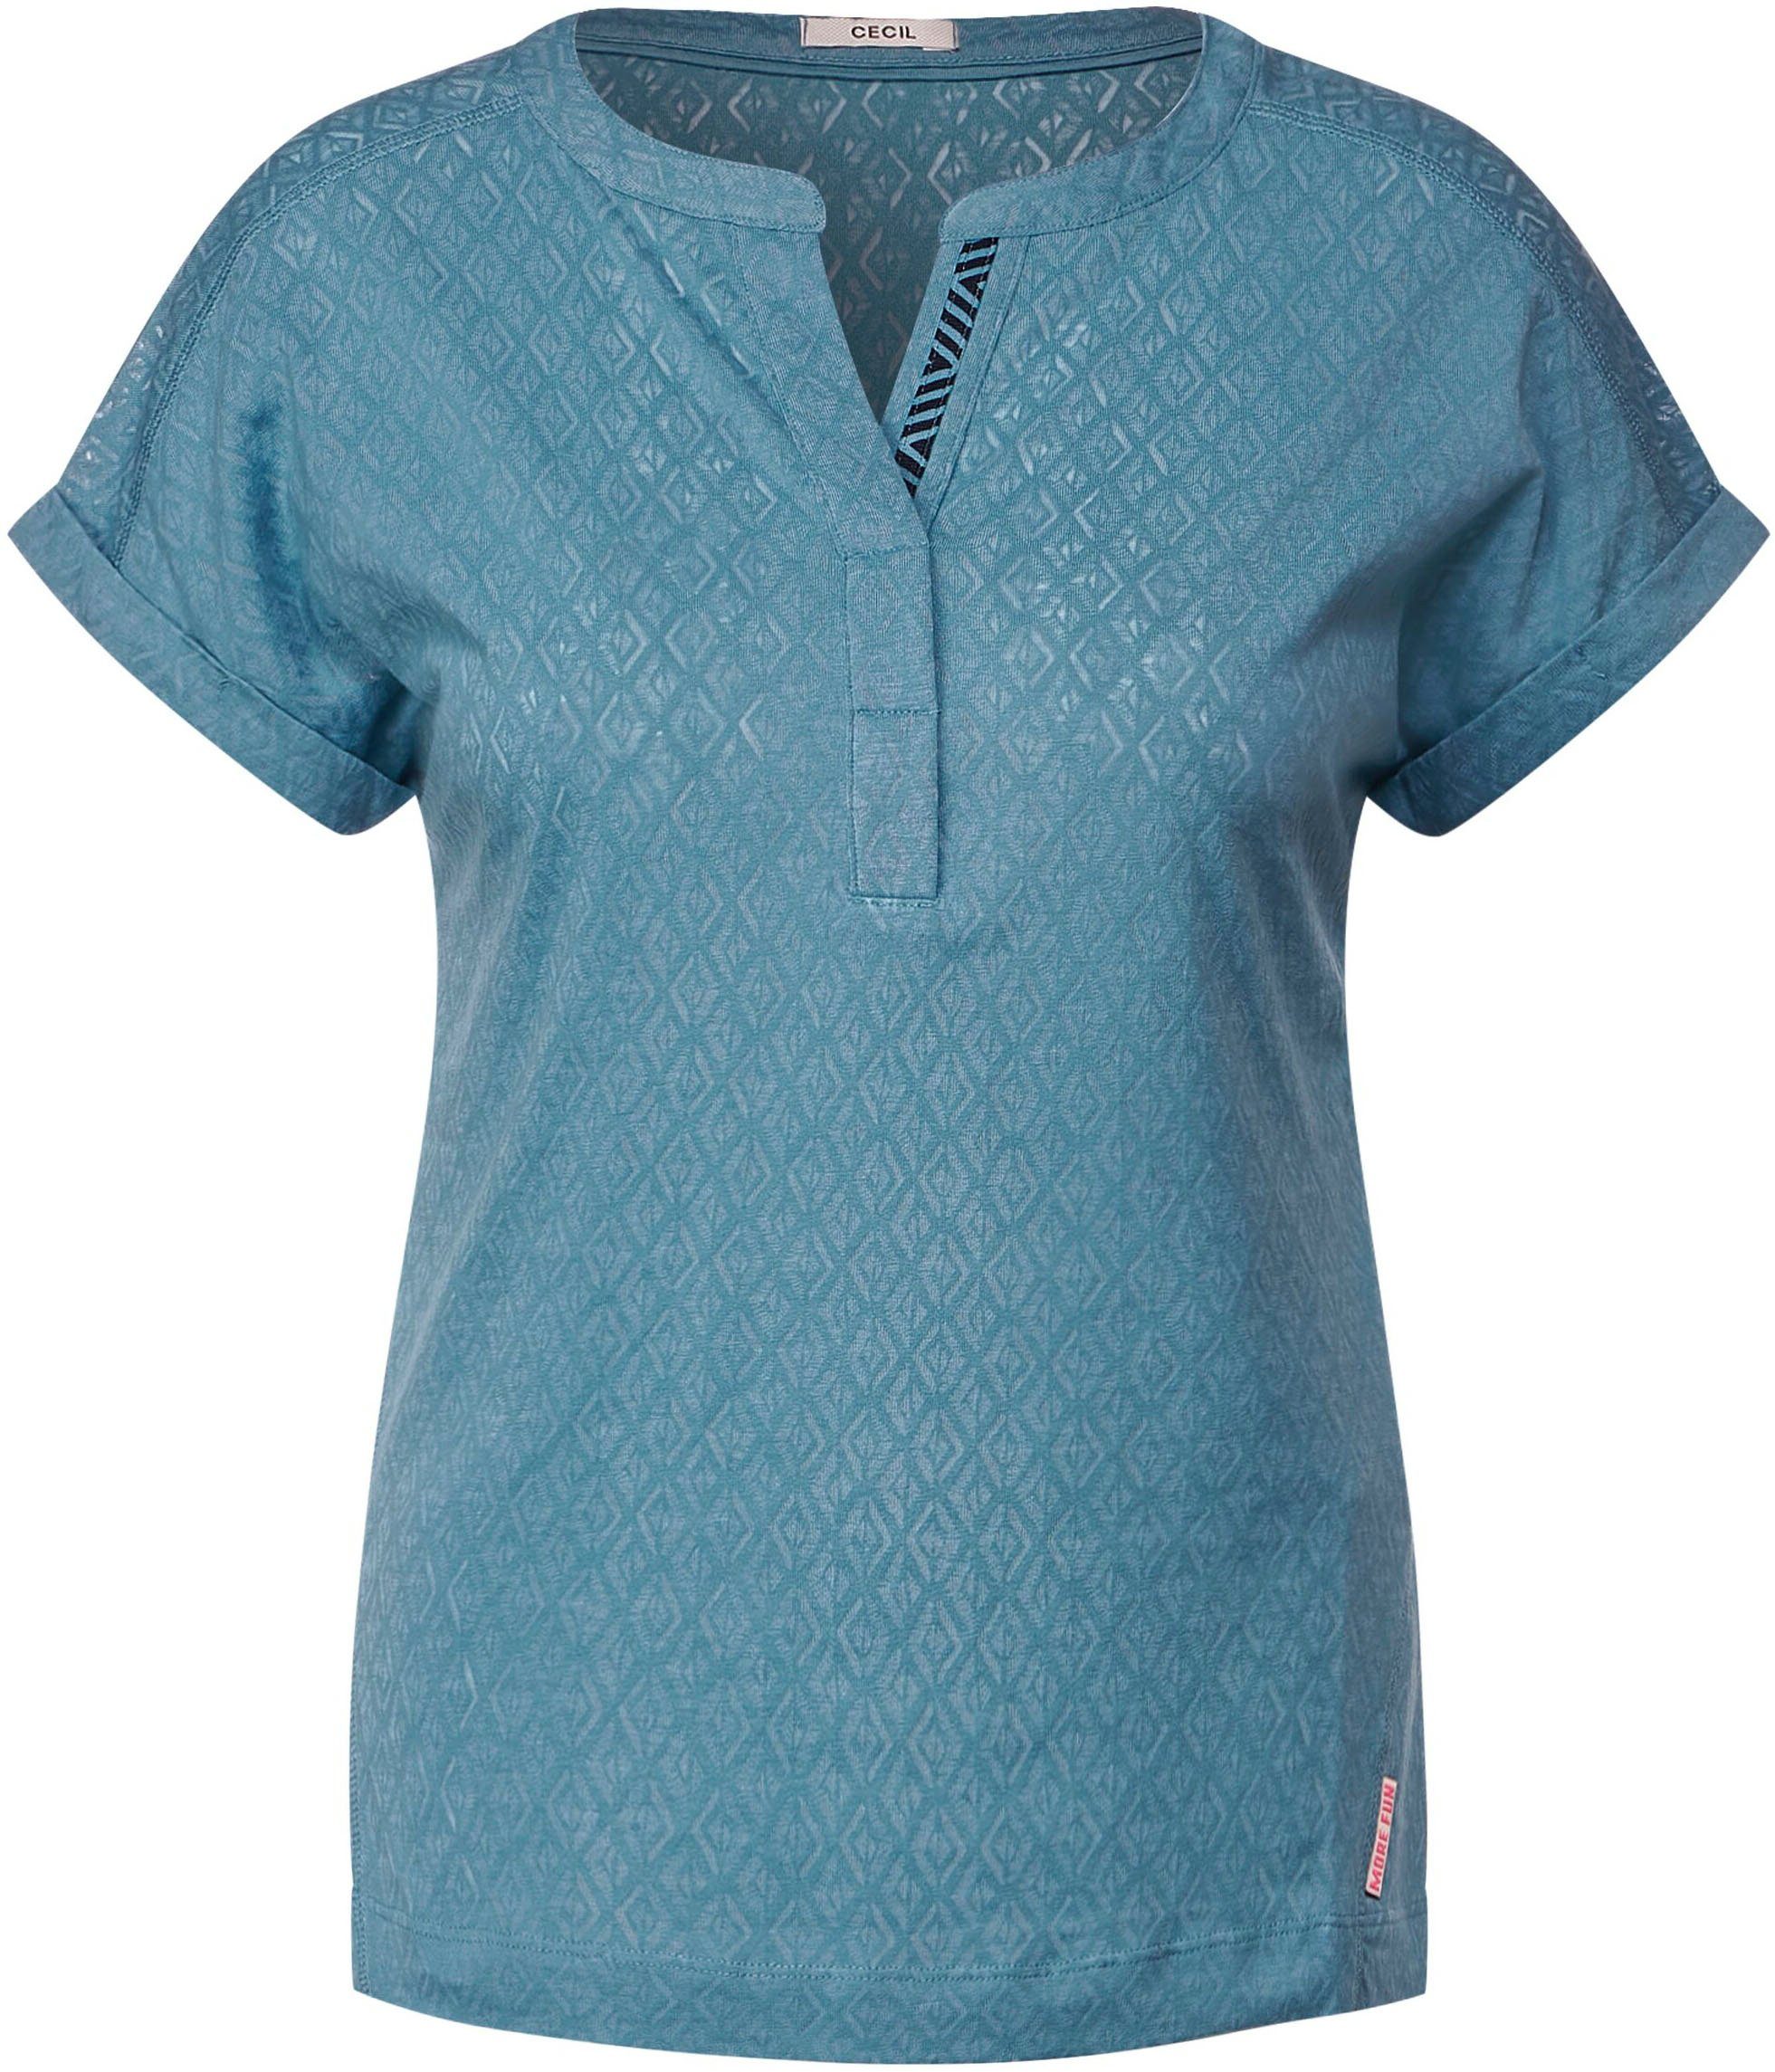 Cecil T-Shirt mit Allover-Muster blue Rhombusform adriatic in